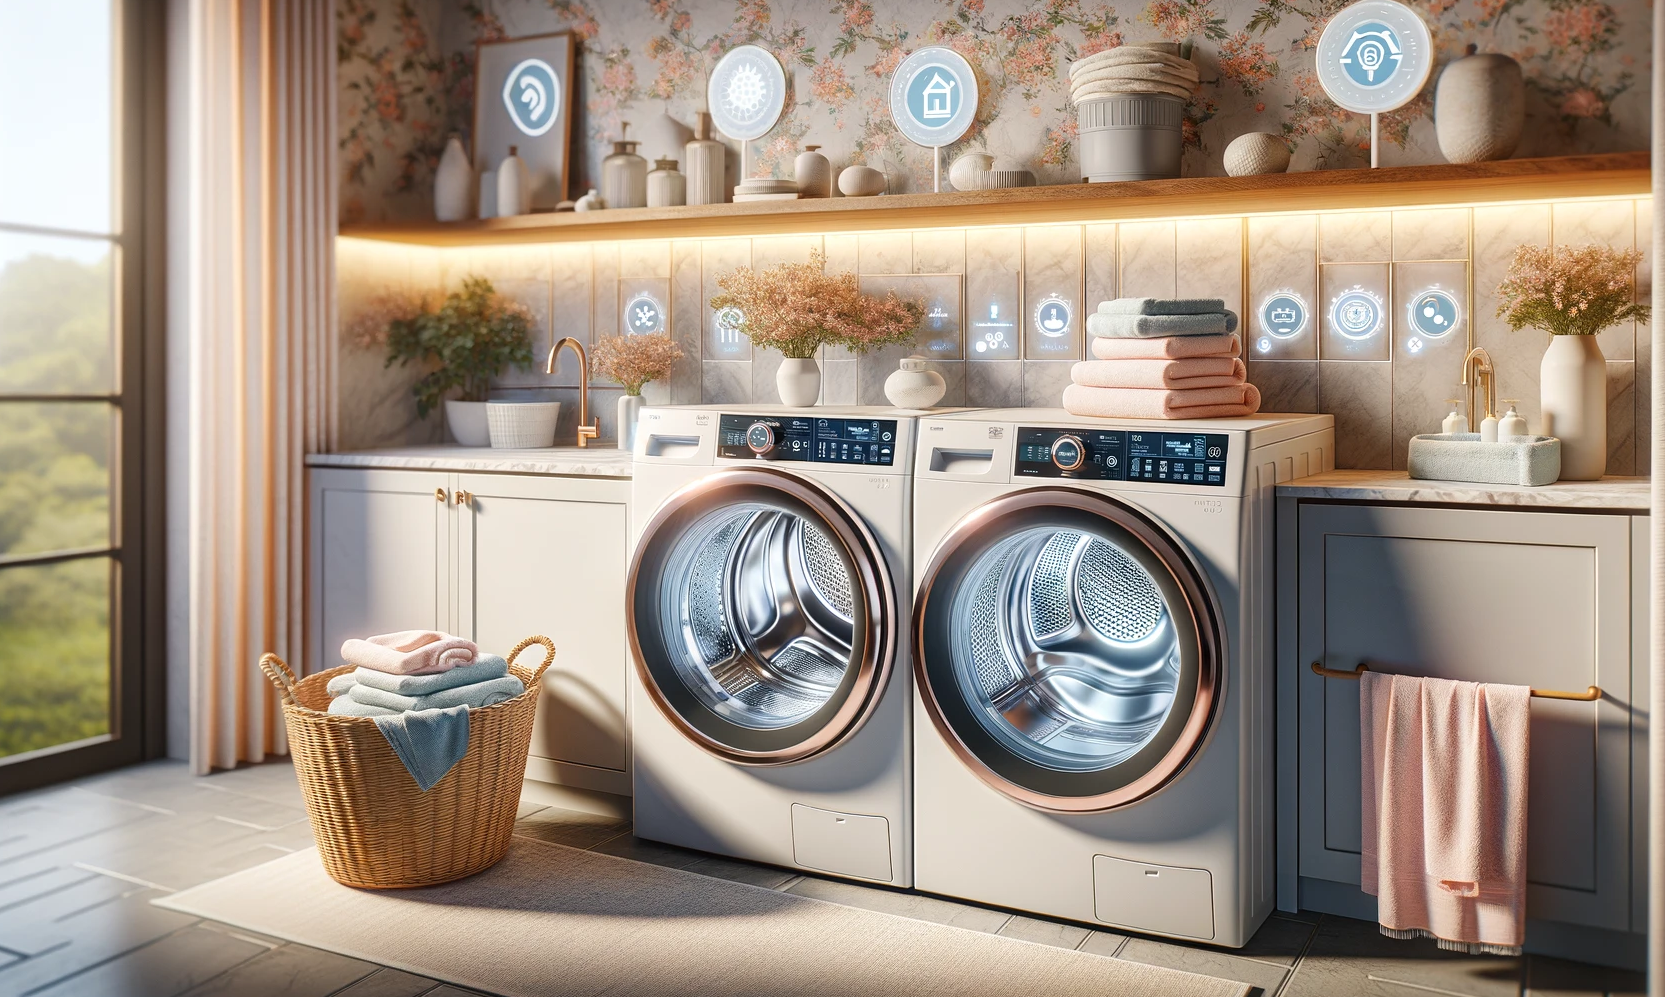 5 “Smarter” Ways to Use Your Smart Laundry Appliances